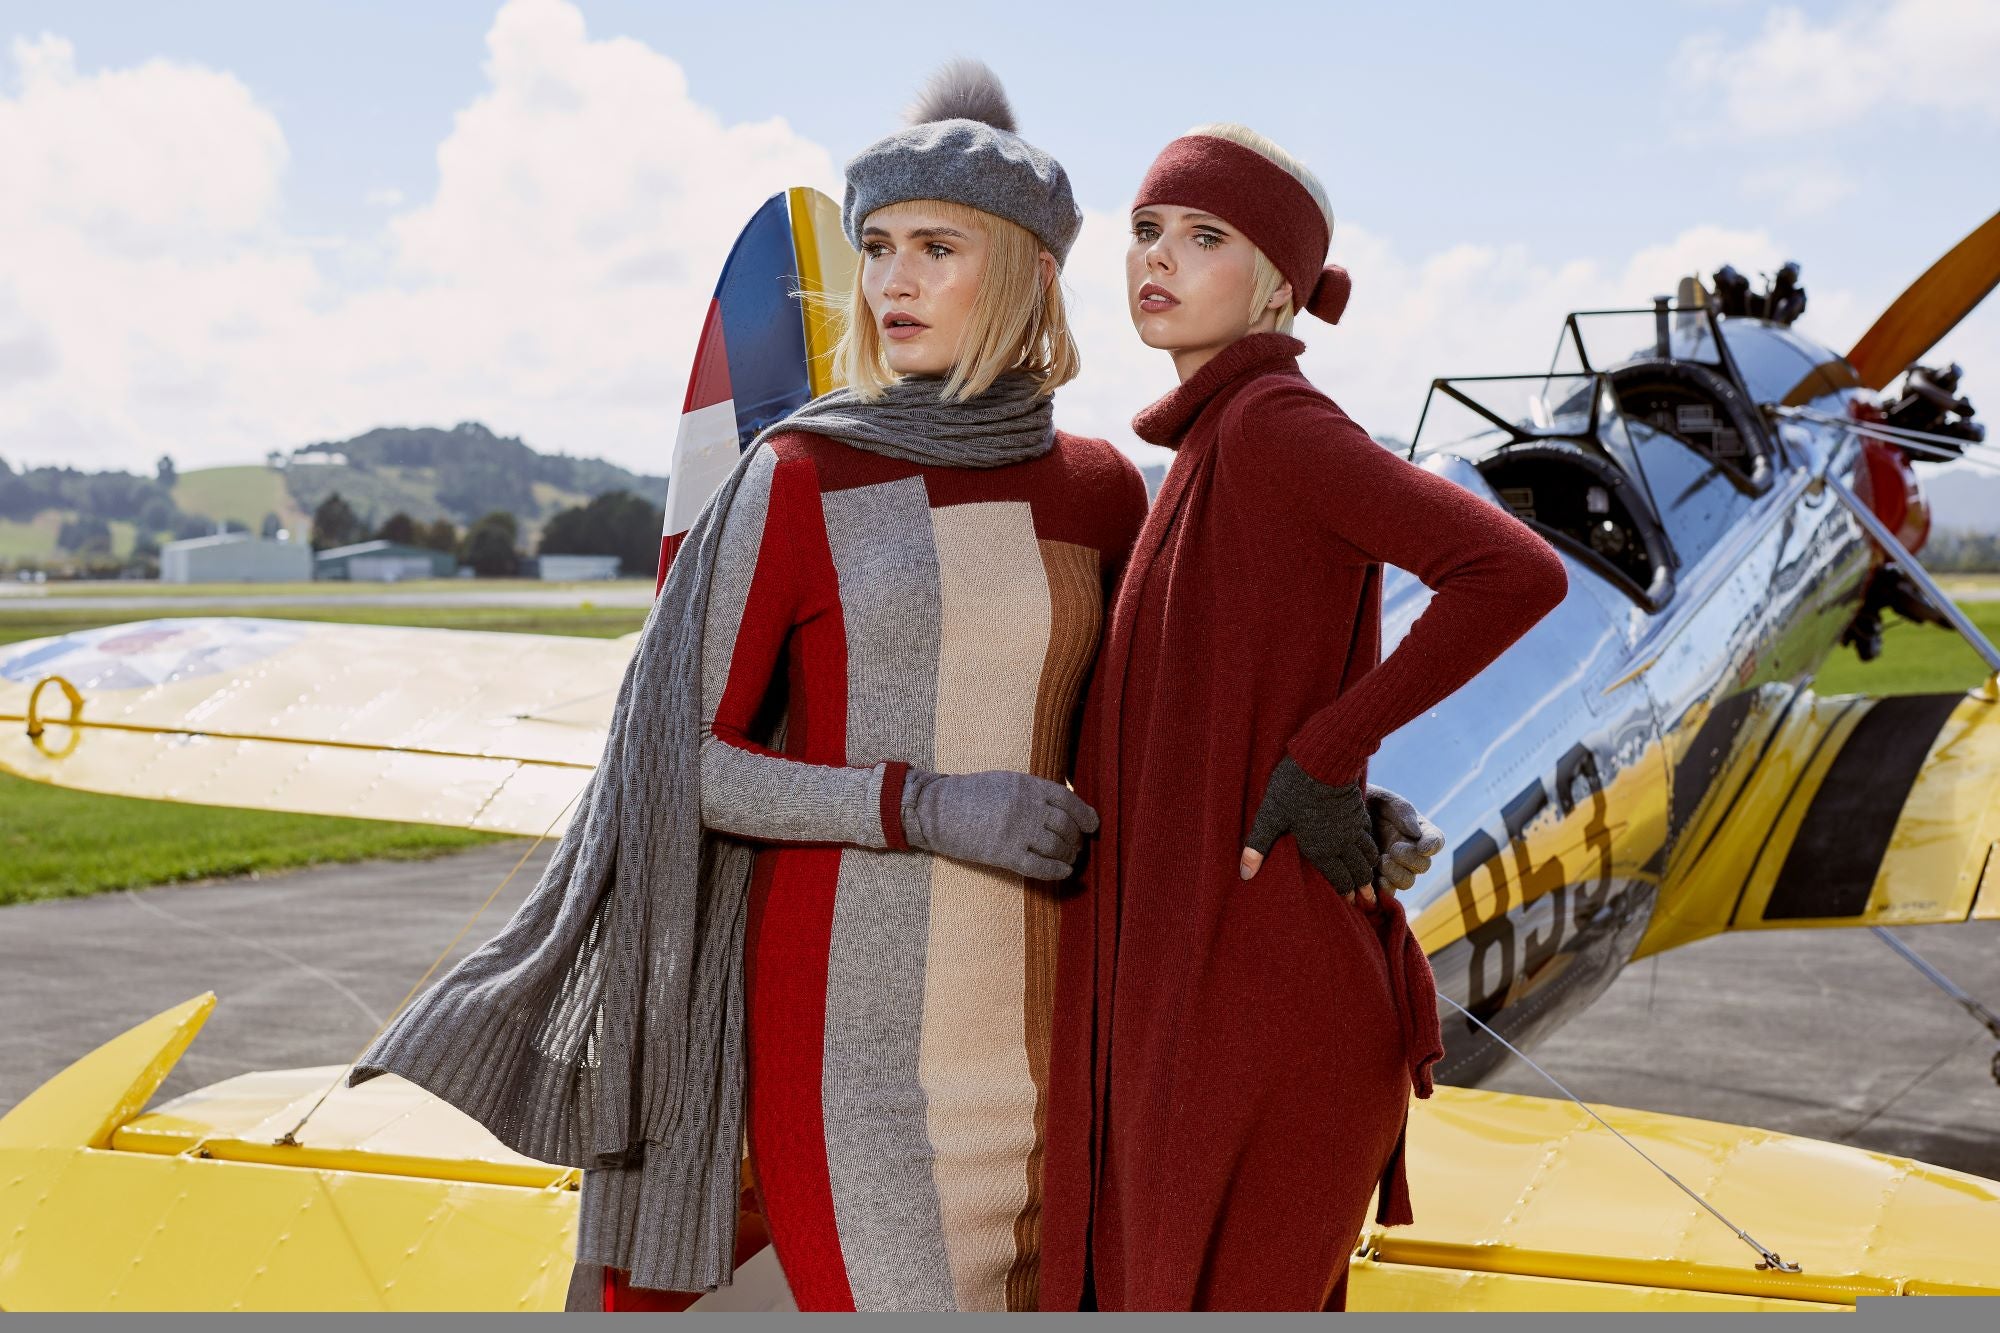 classy ladies wearing slim woolen dresses and beret in front of a plane